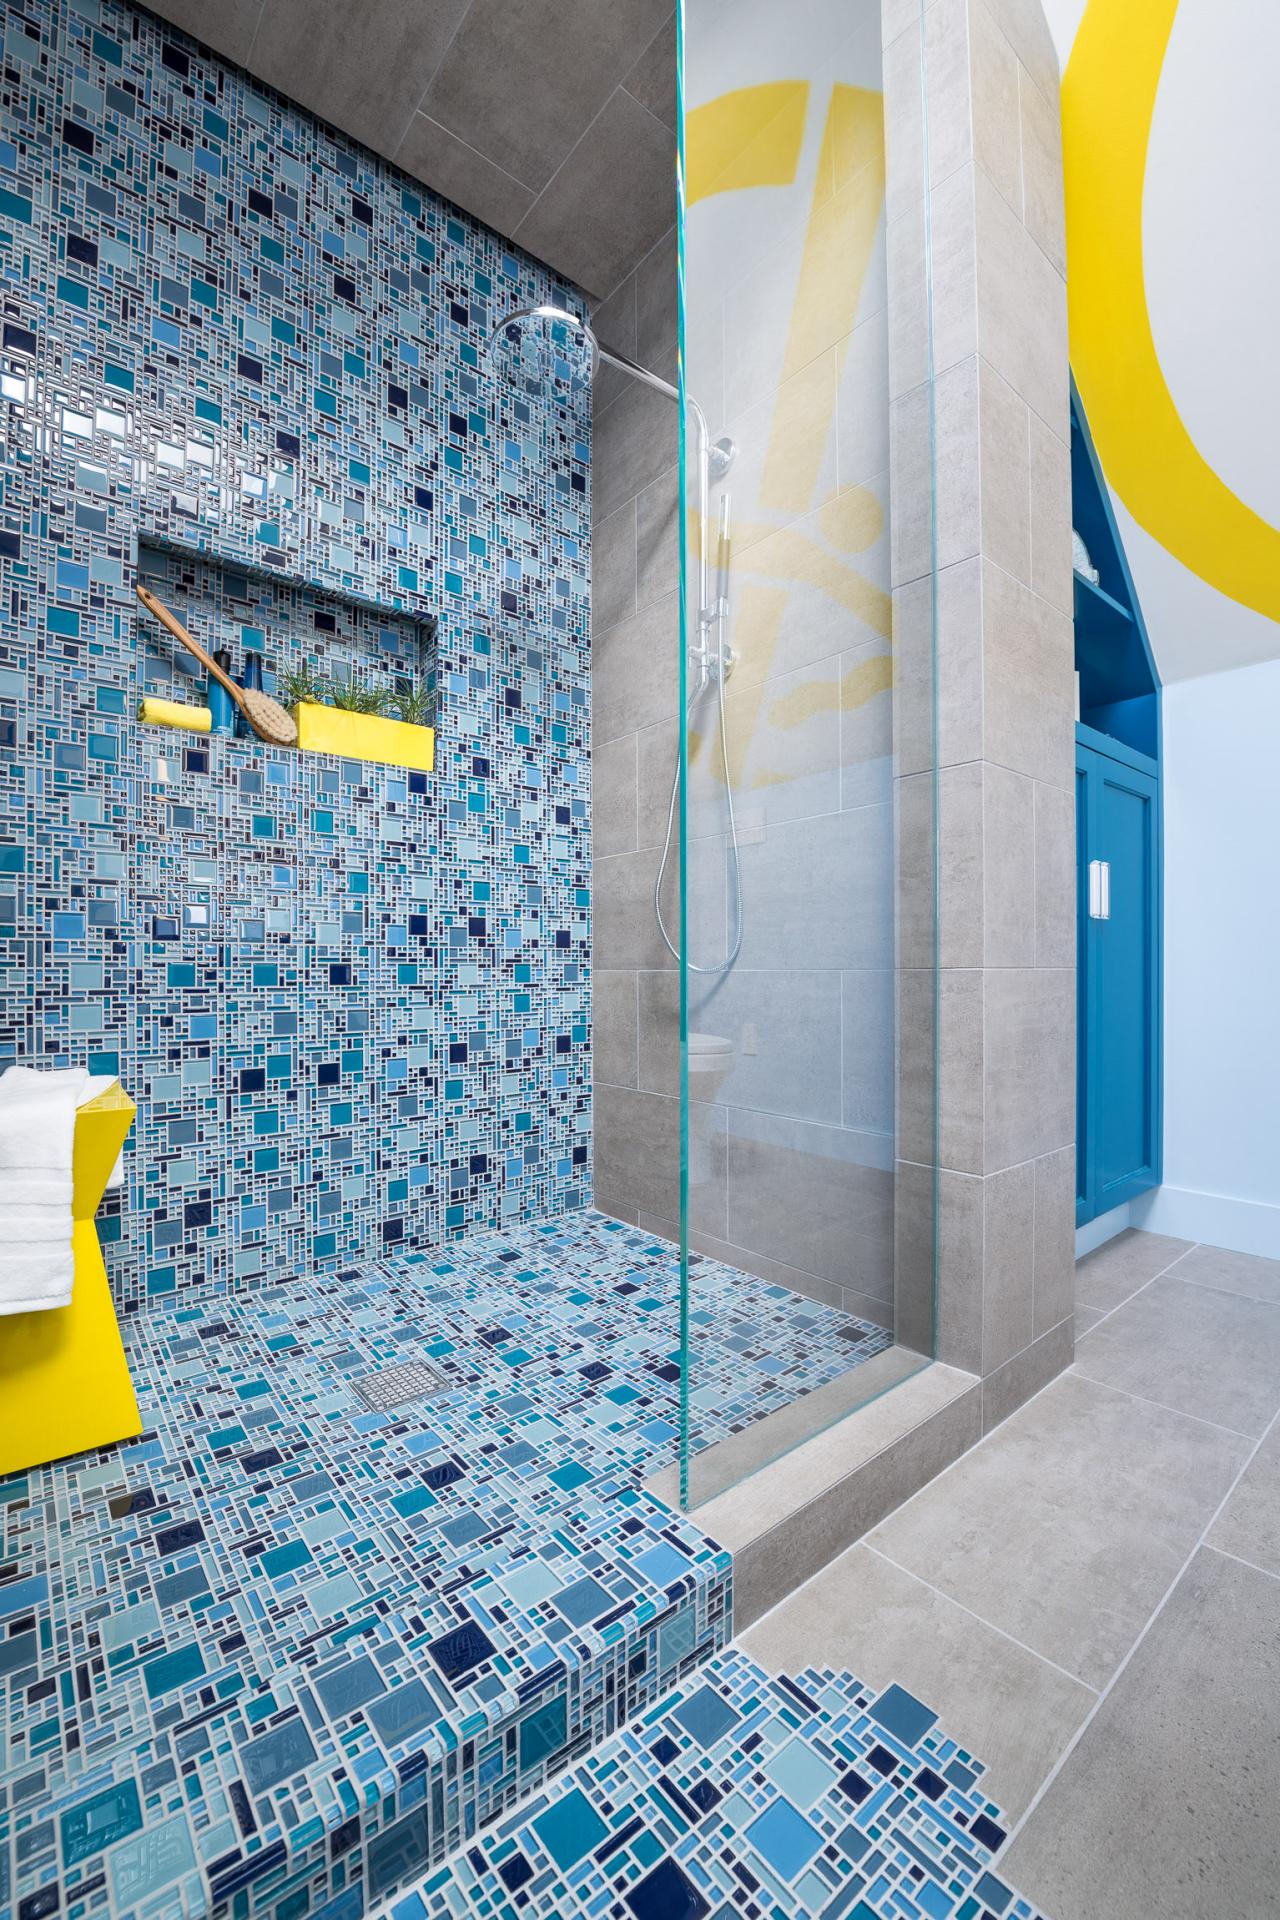 Blue Mosaic Tile Spills From Shower Onto Floor to Create ...